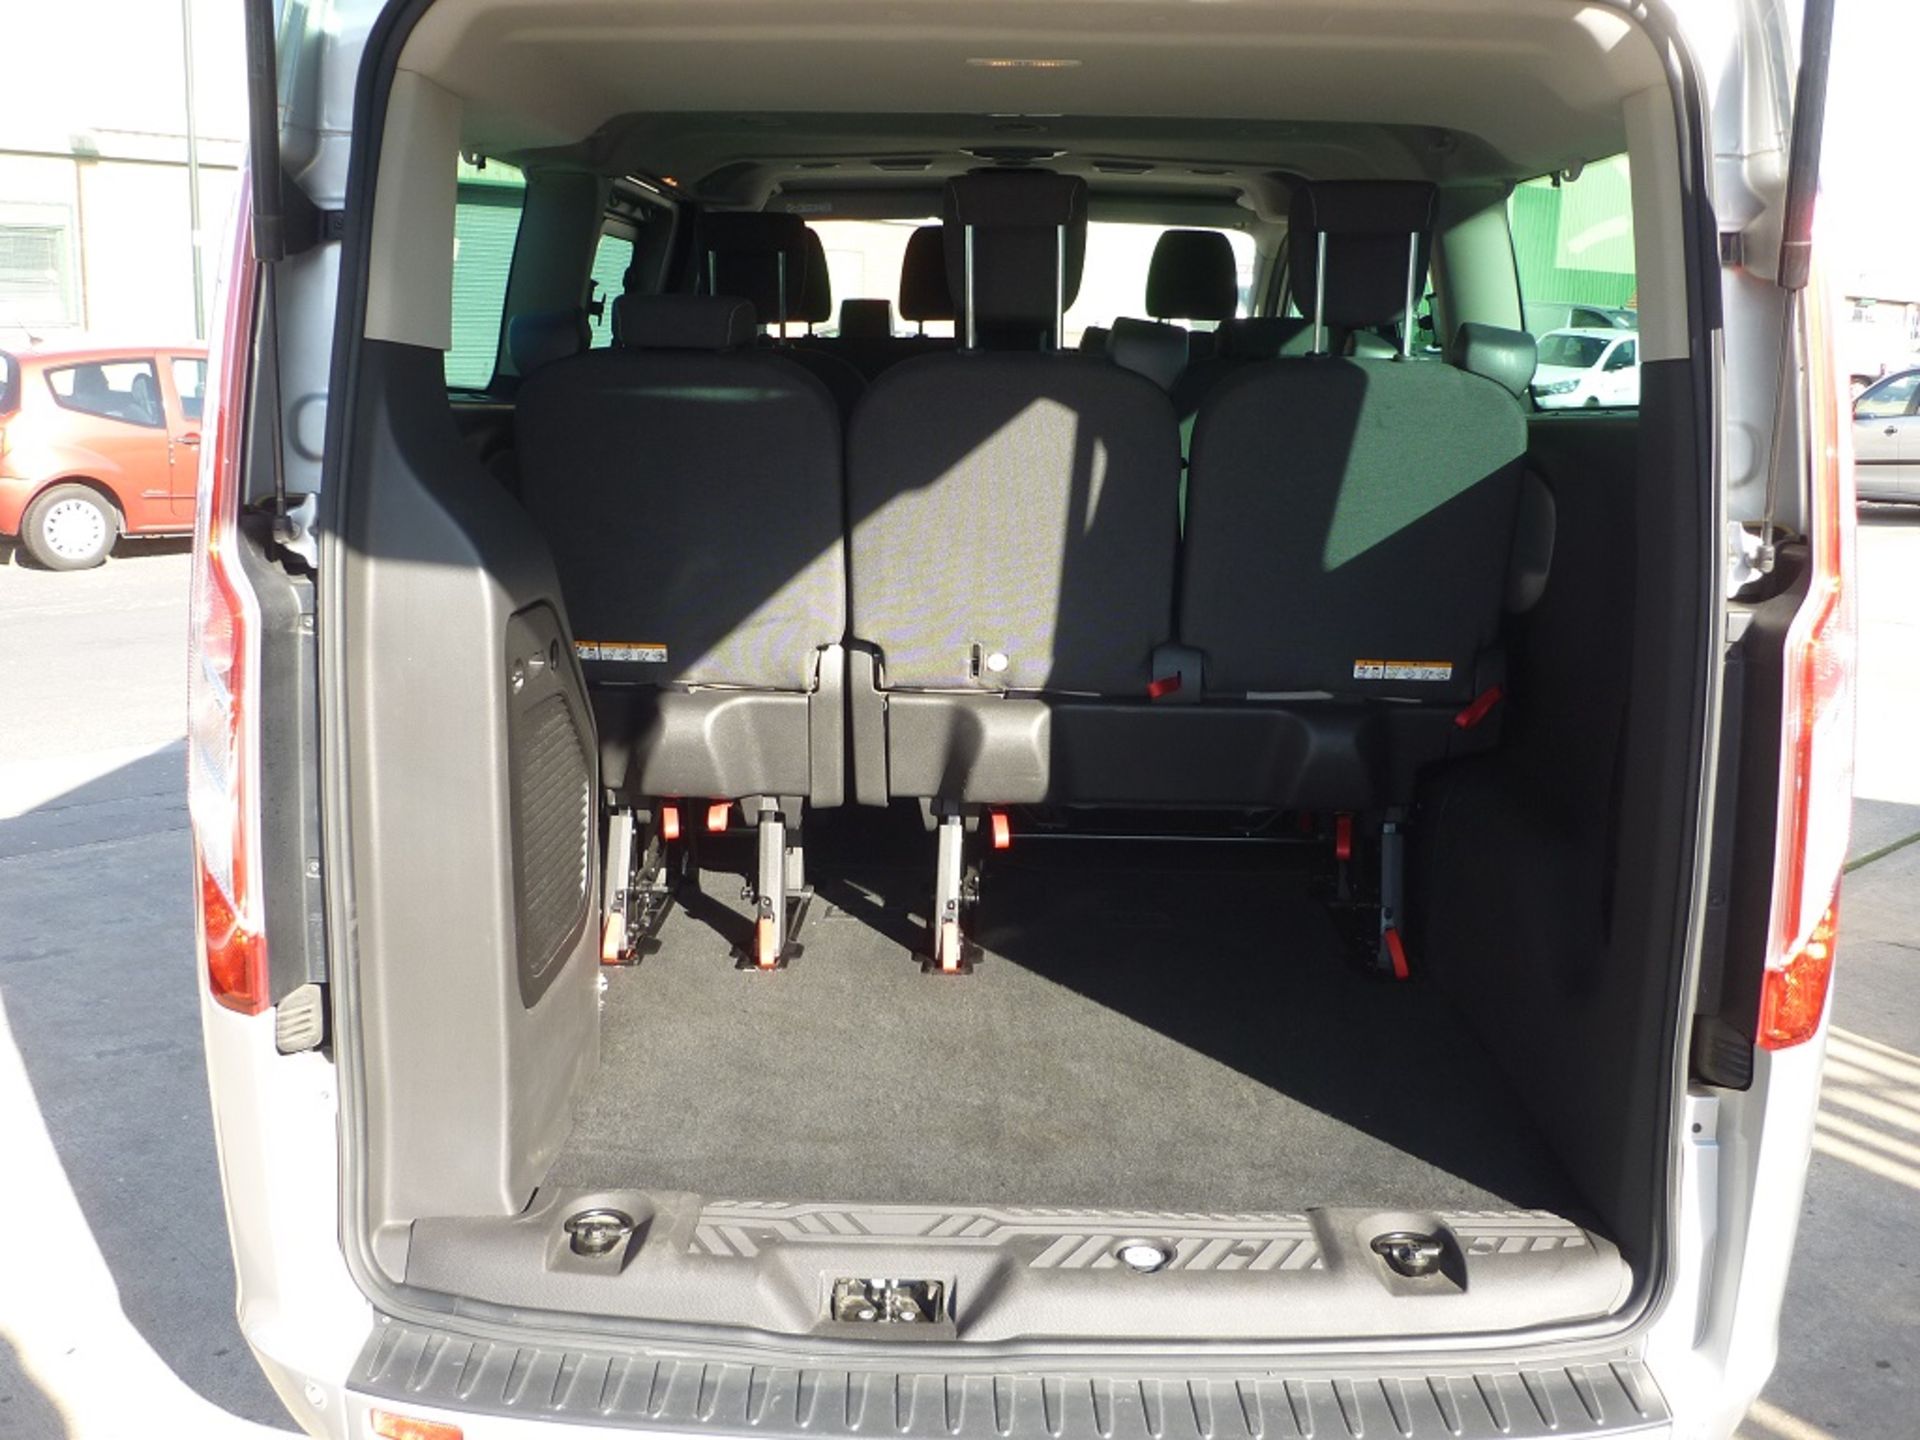 2015/15 REG FORD TOURNEO CUSTOM 300 LIMITED EDITION SILVER DIESEL MPV, SHOWING 0 FORMER KEEPERS - Image 6 of 8